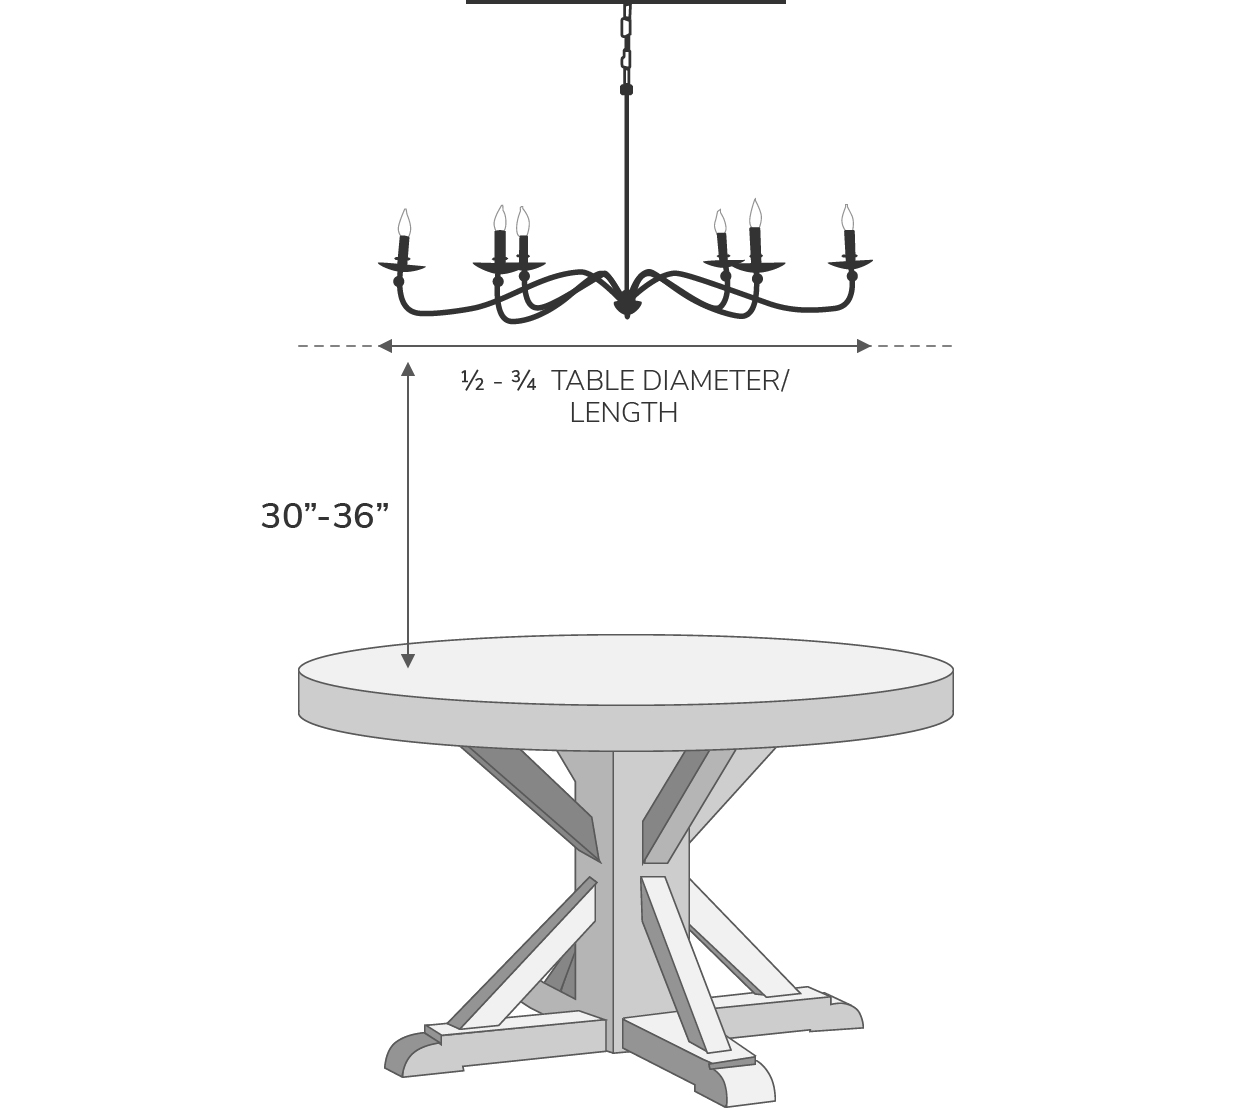 The Lighting Guide Pottery Barn, Correct Size For Dining Room Chandelier